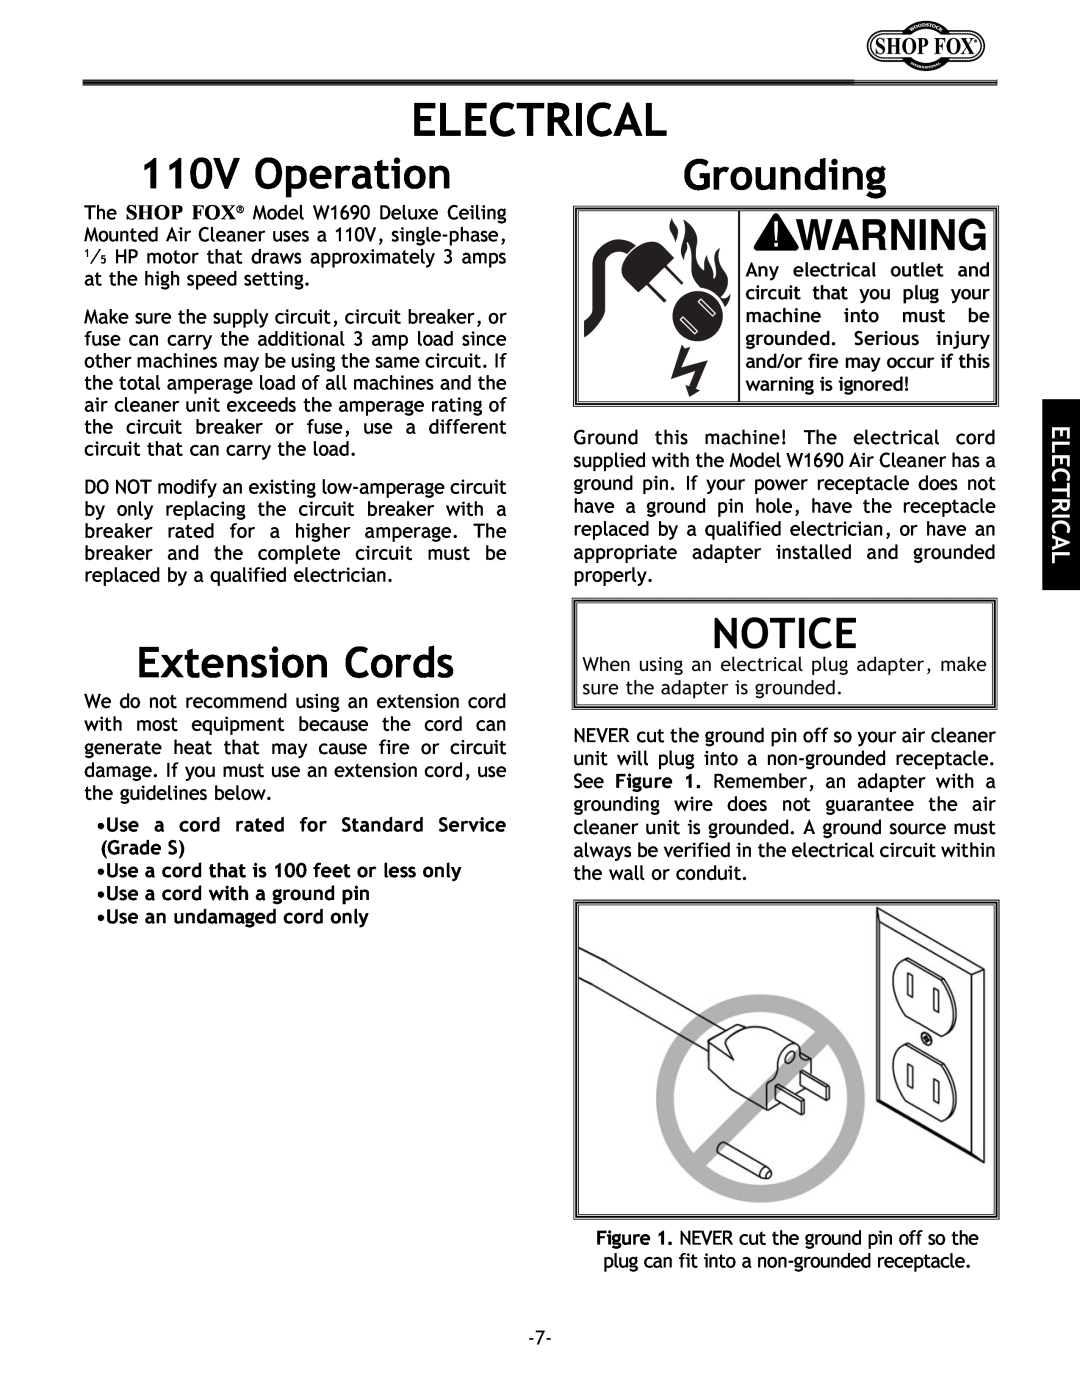 Woodstock W1690 instruction manual Electrical, 110V Operation, Grounding, Extension Cords 